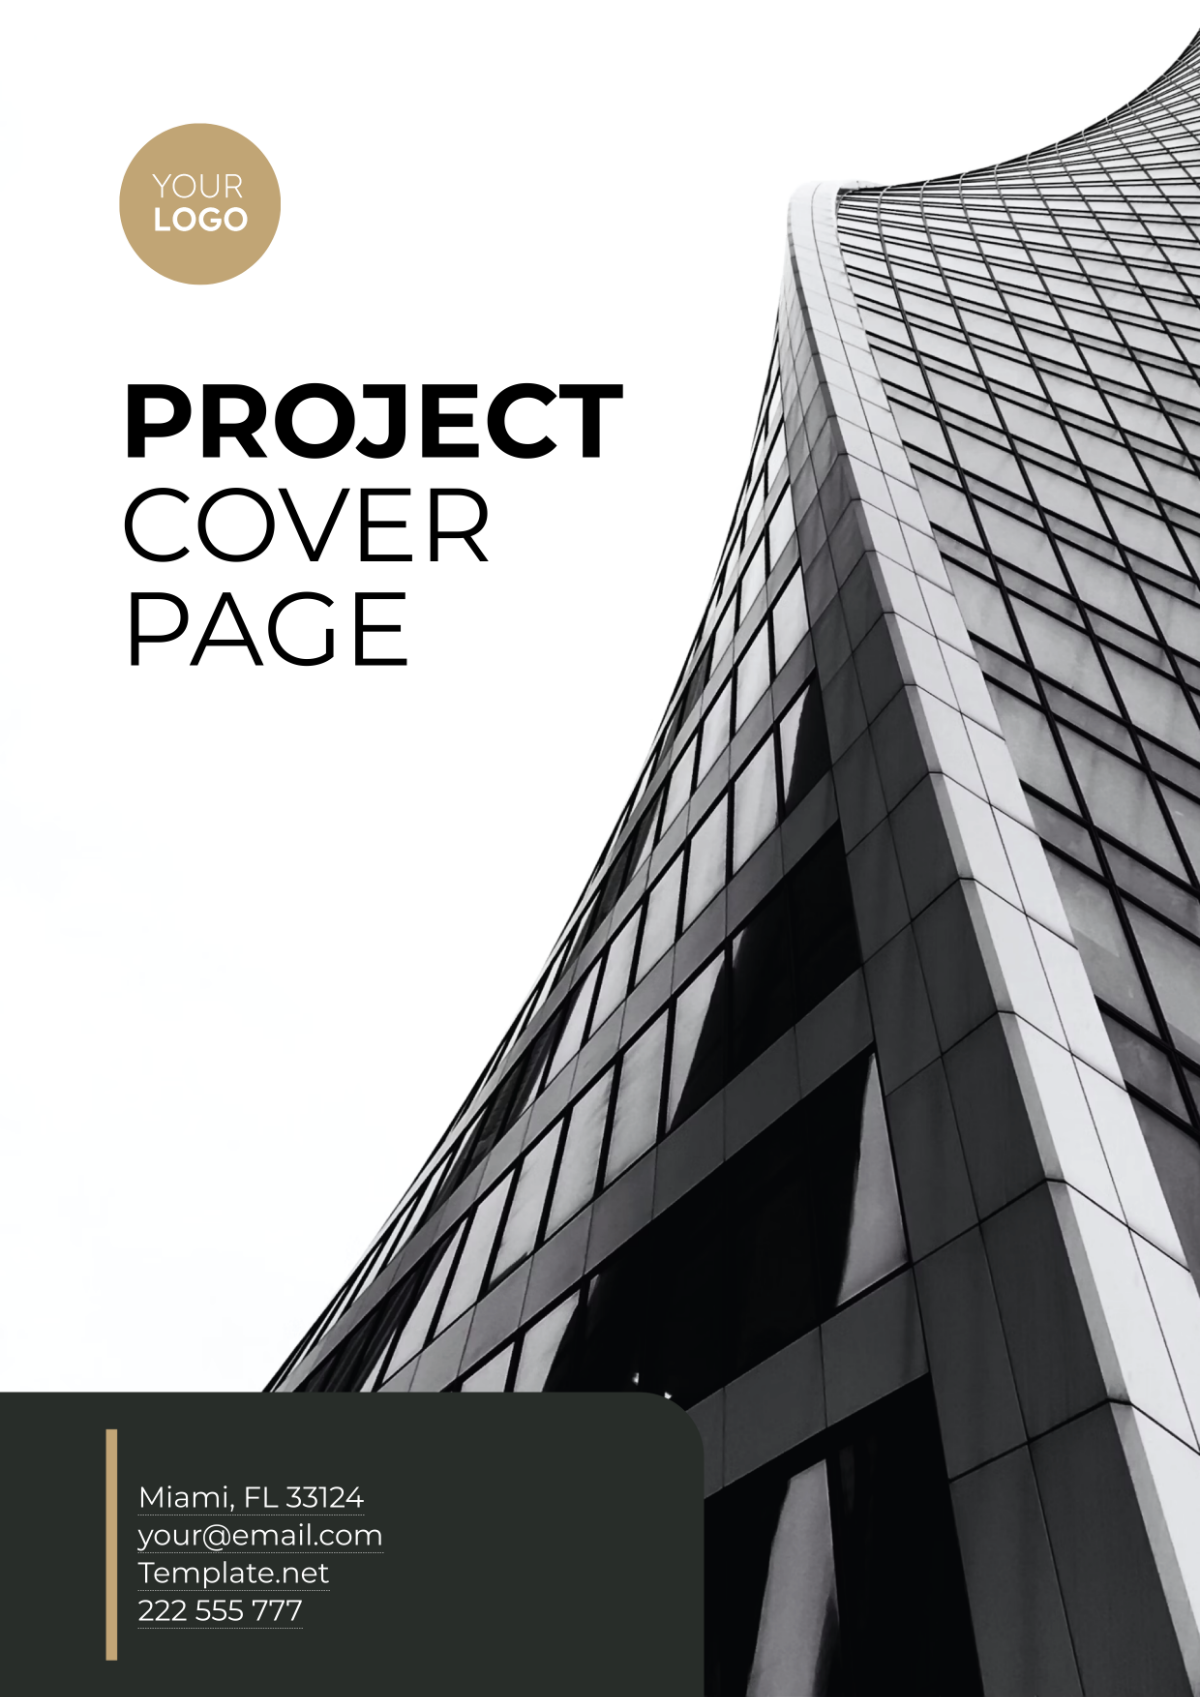 Project Cover Page Template - Edit Online & Download Example | Template.net